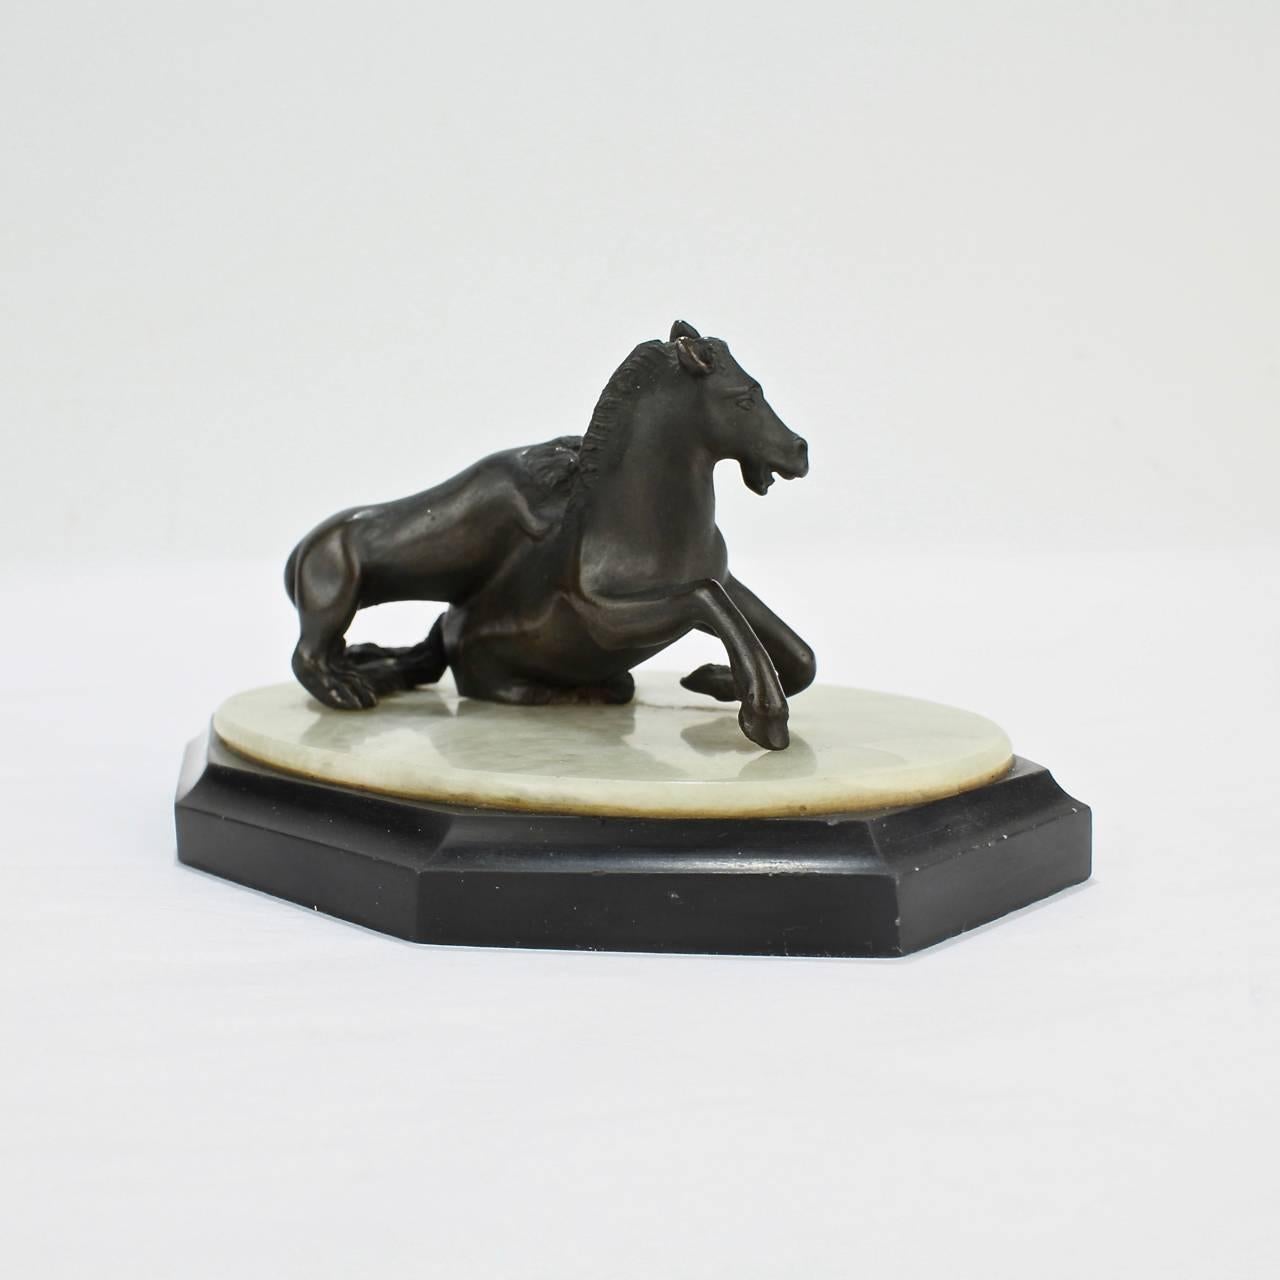 19th Century Grand Tour Lion Attacking a Horse Miniature Bronze Sculpture In Good Condition For Sale In Philadelphia, PA